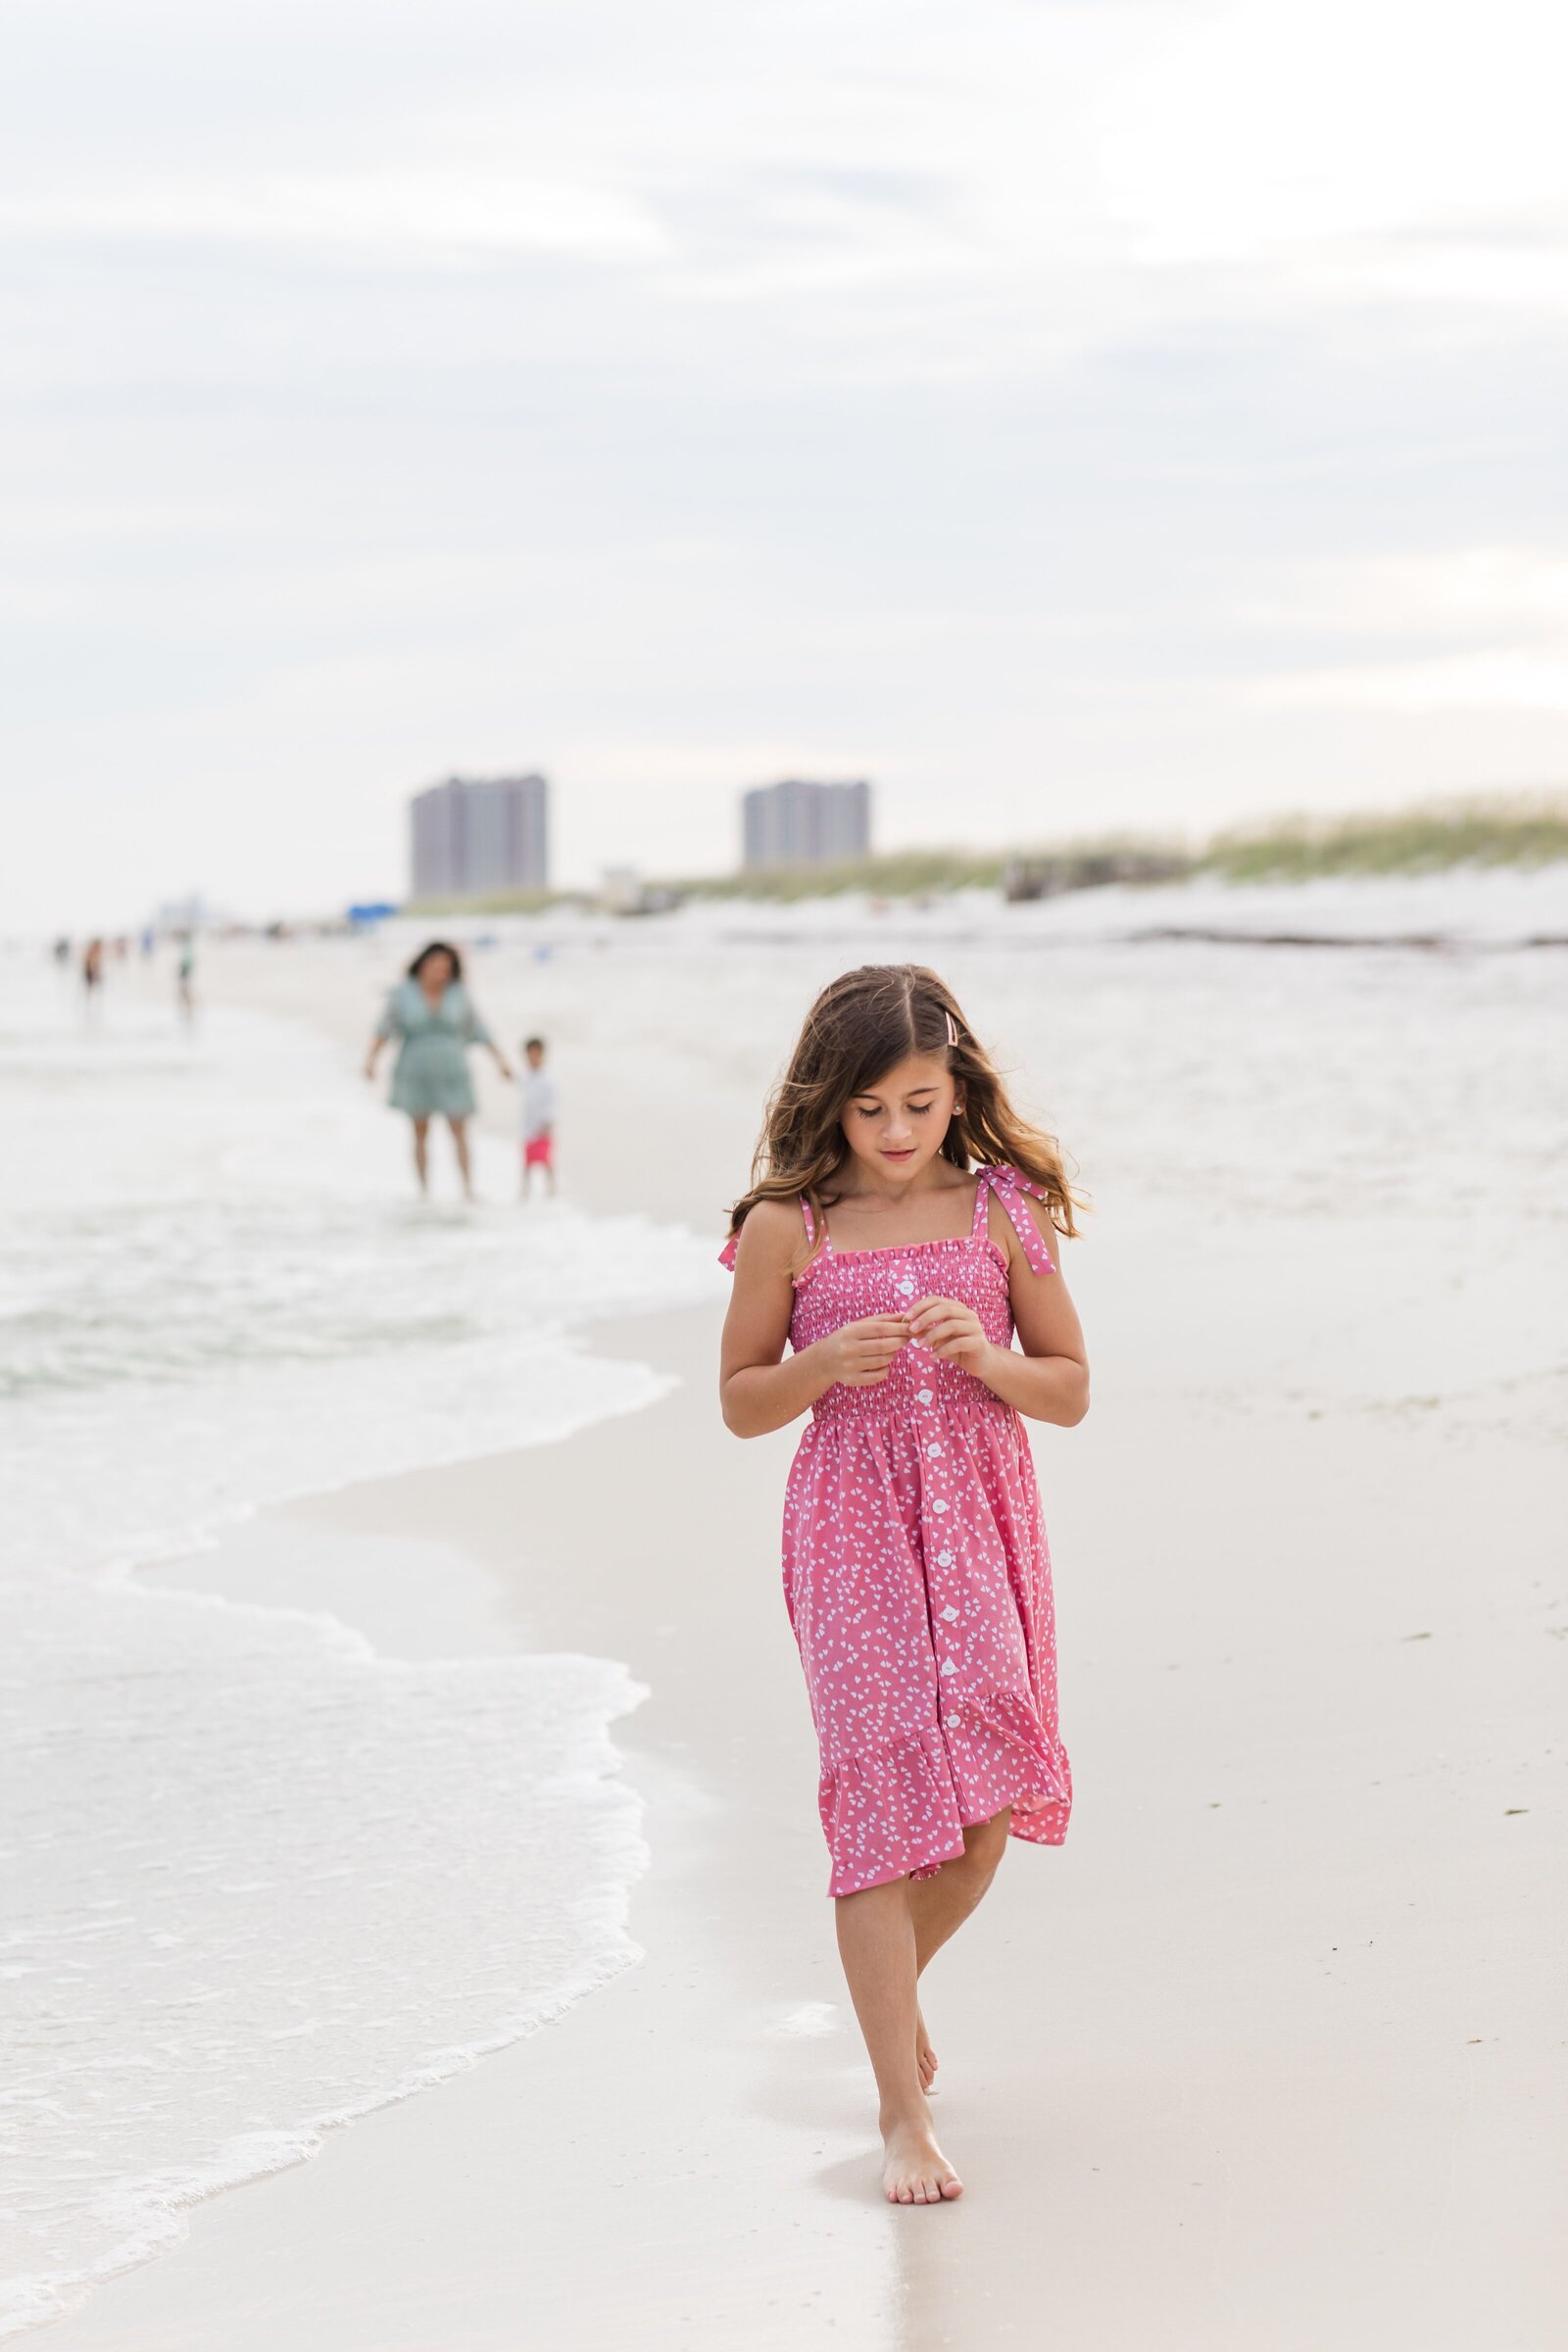 Pensacola Beach vacation family photo session . Daughter walking  at the edge of the water.